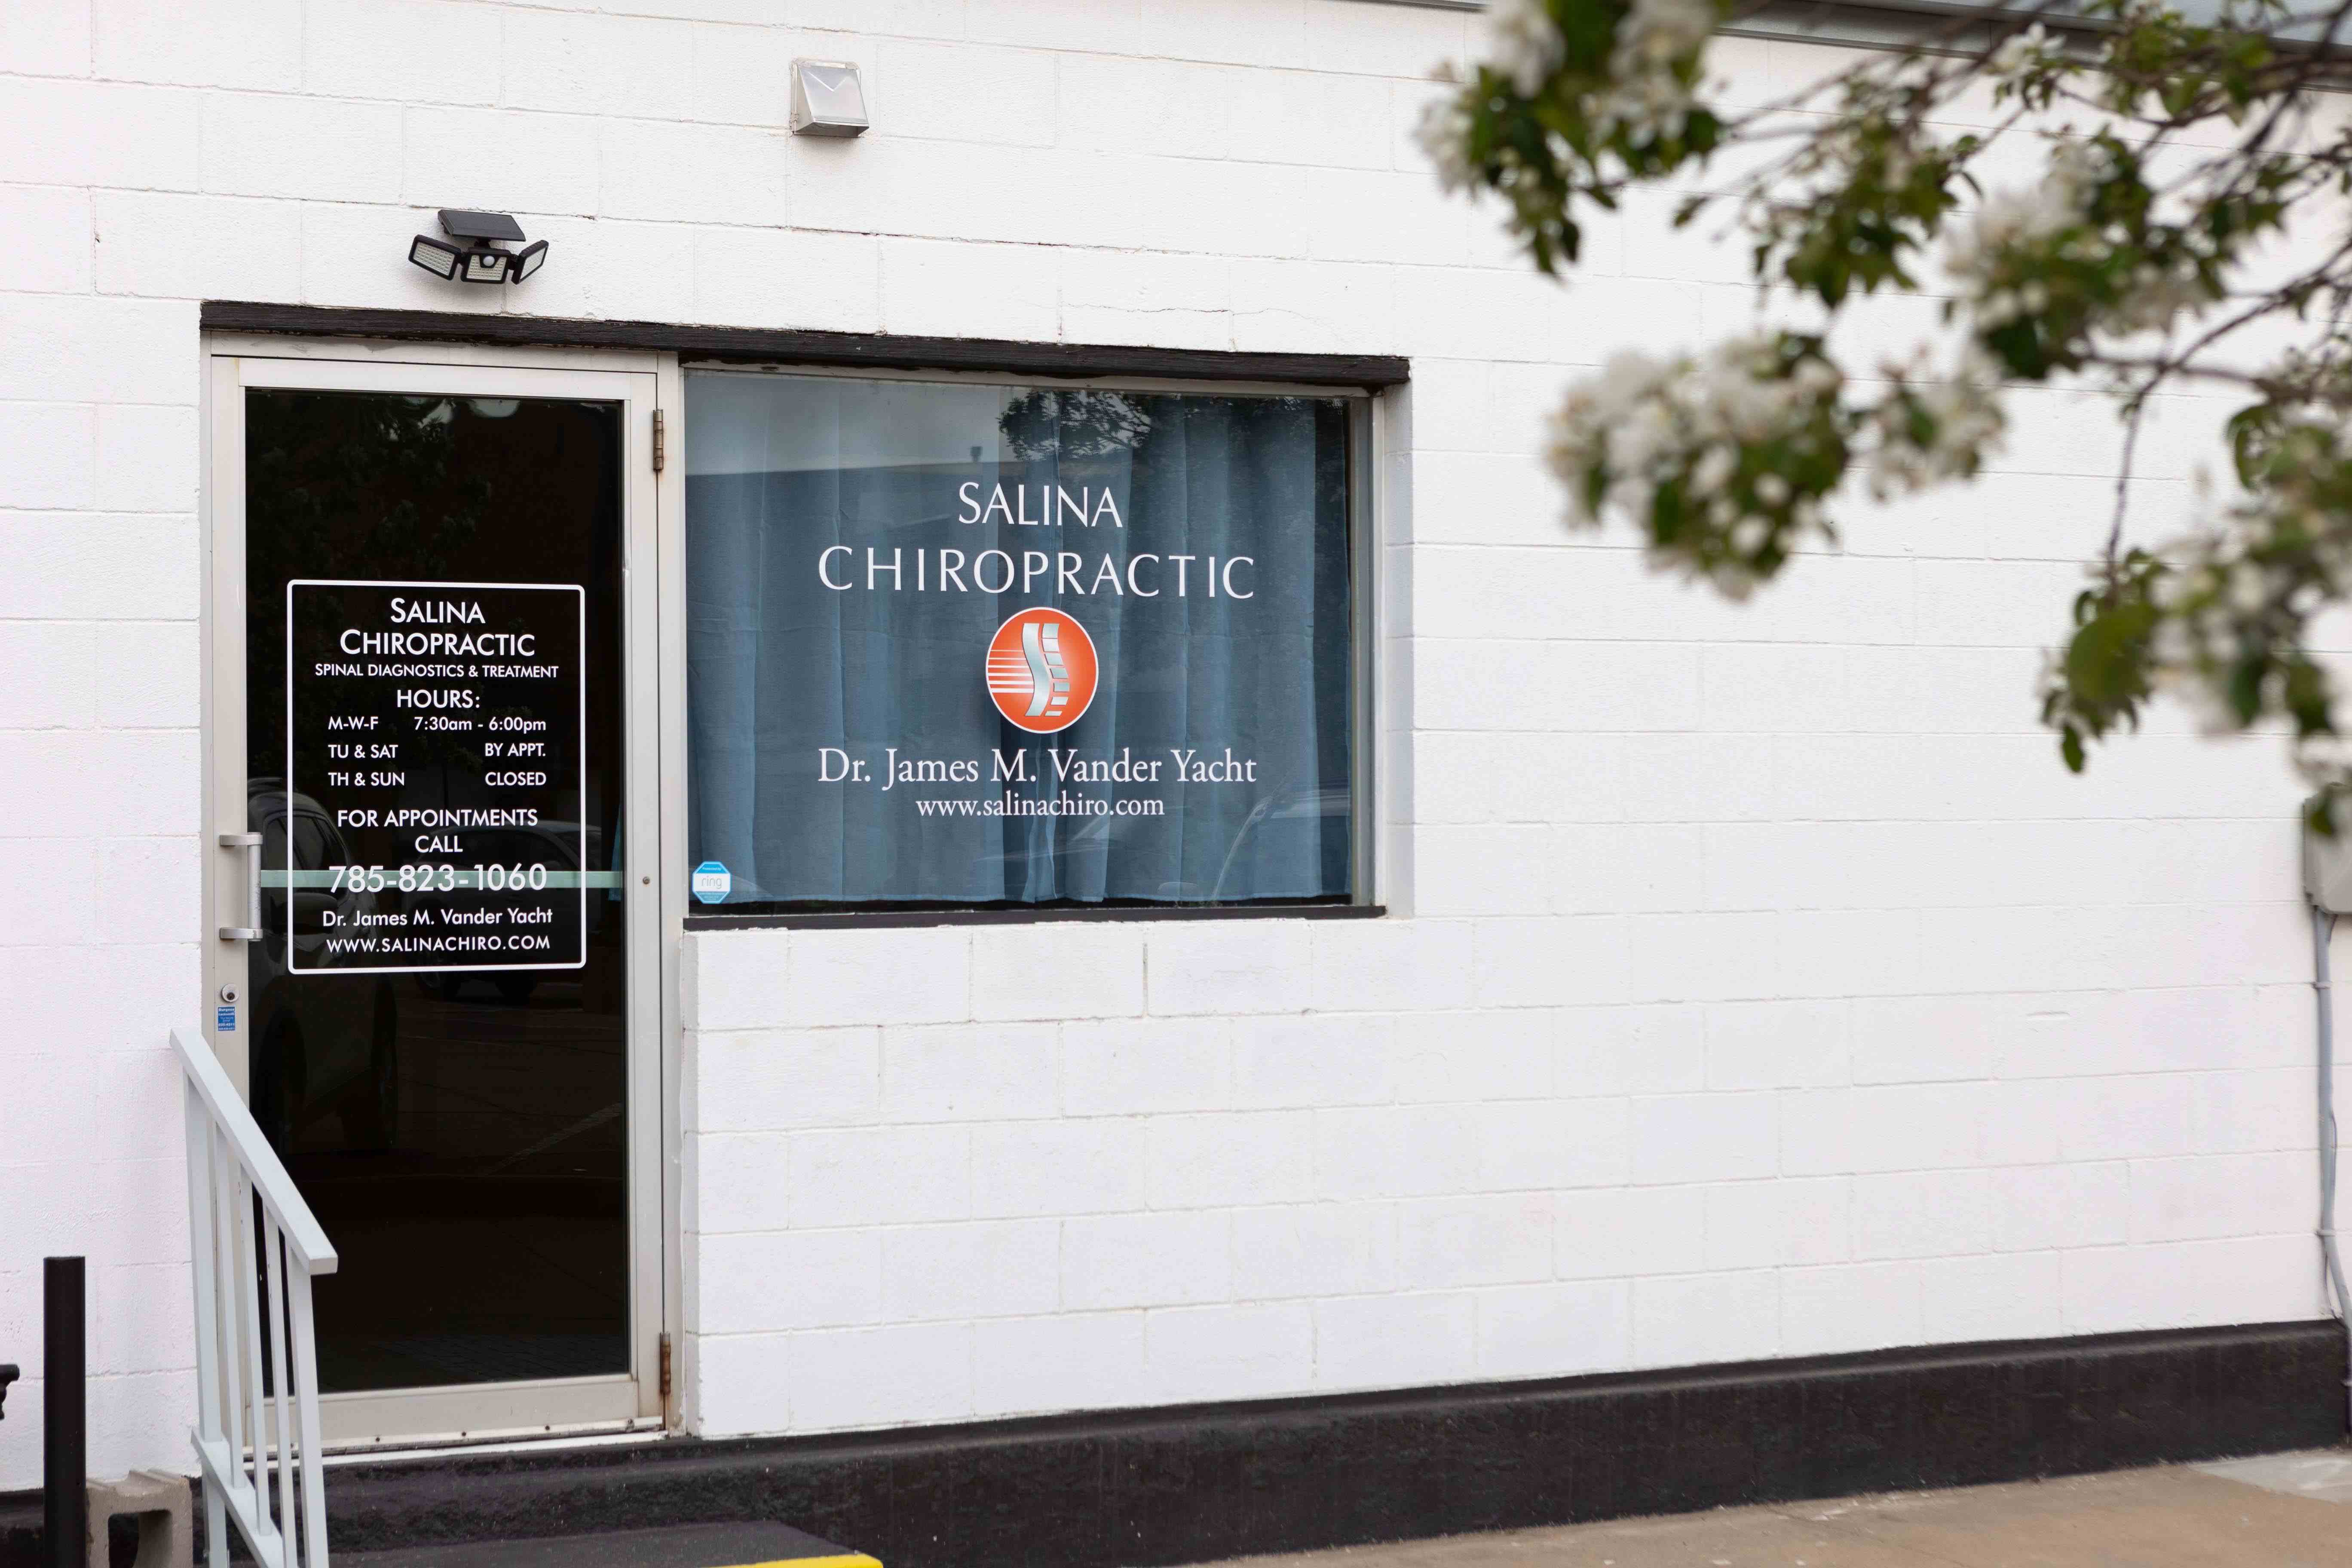 Outside view of a chiropractic office